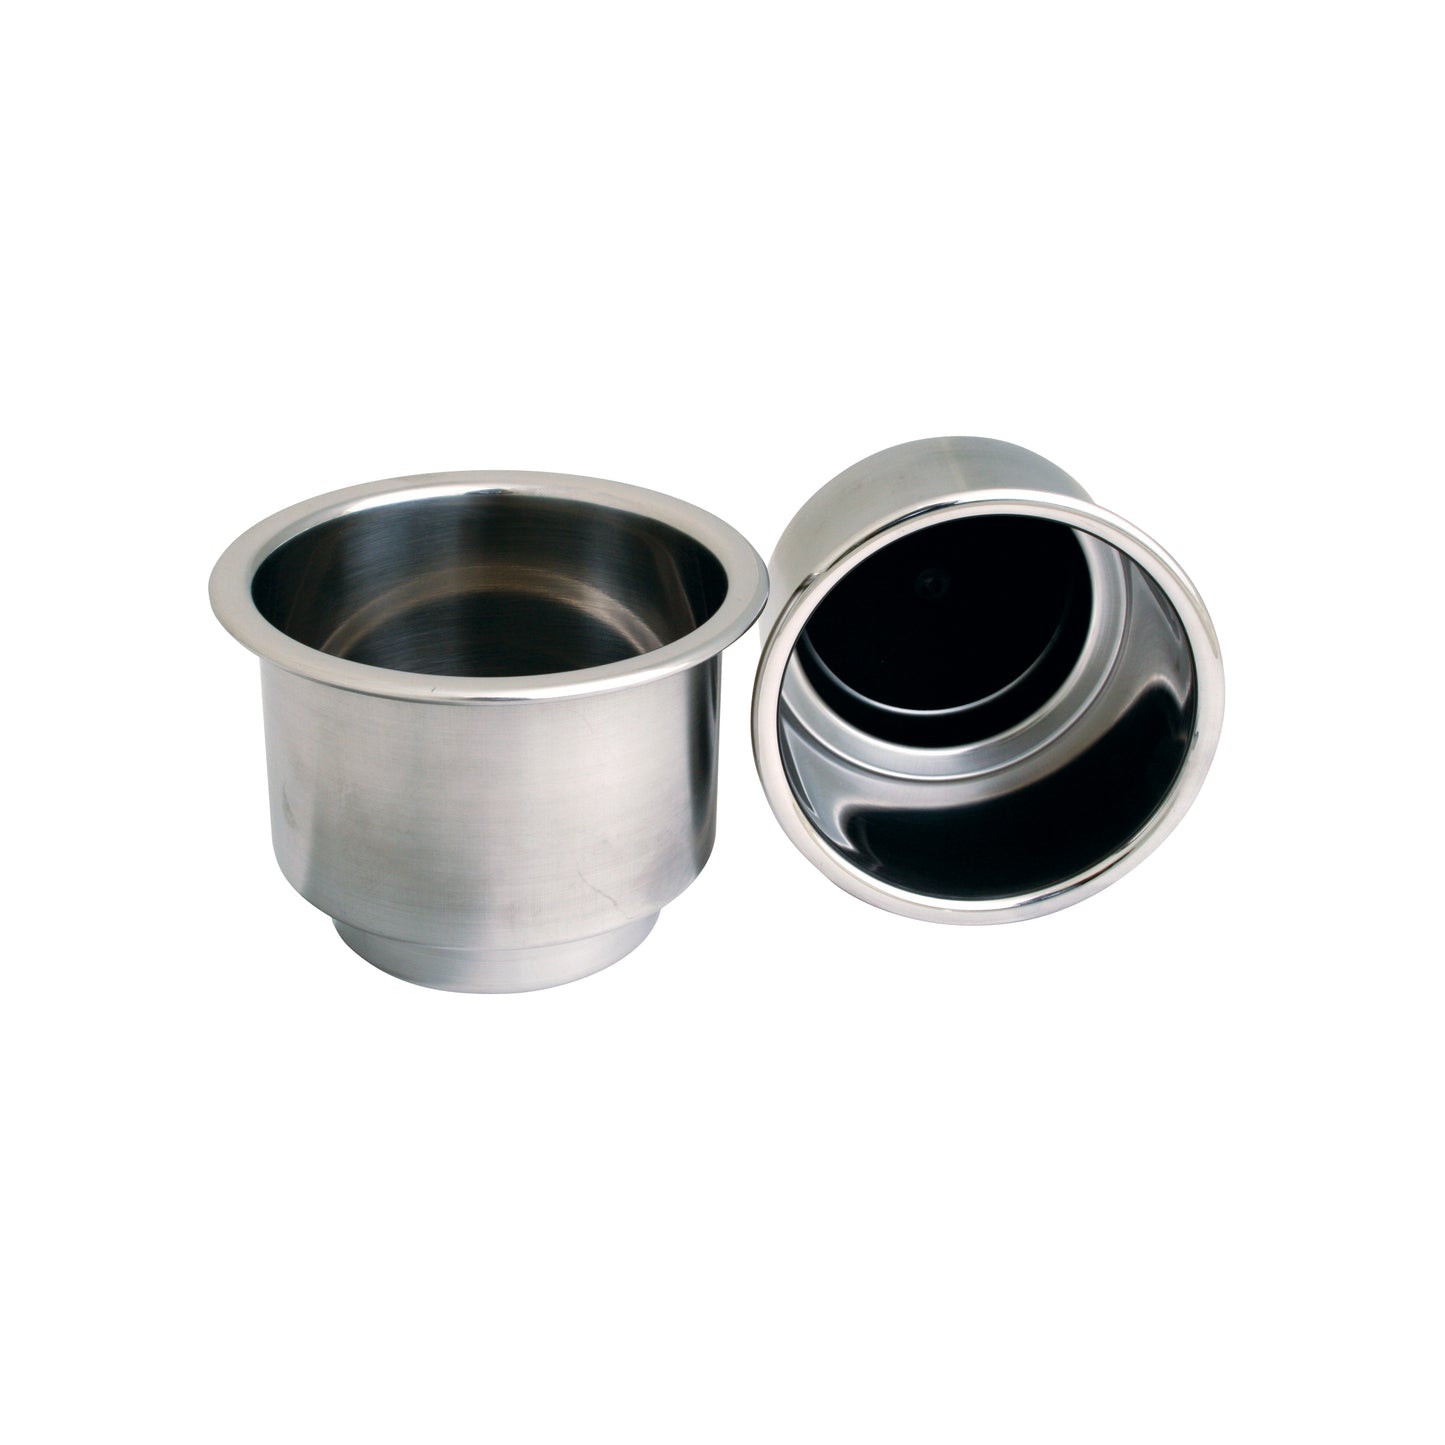 SBH - polished stainless steel beverage holders available in two sizes and several optional colors